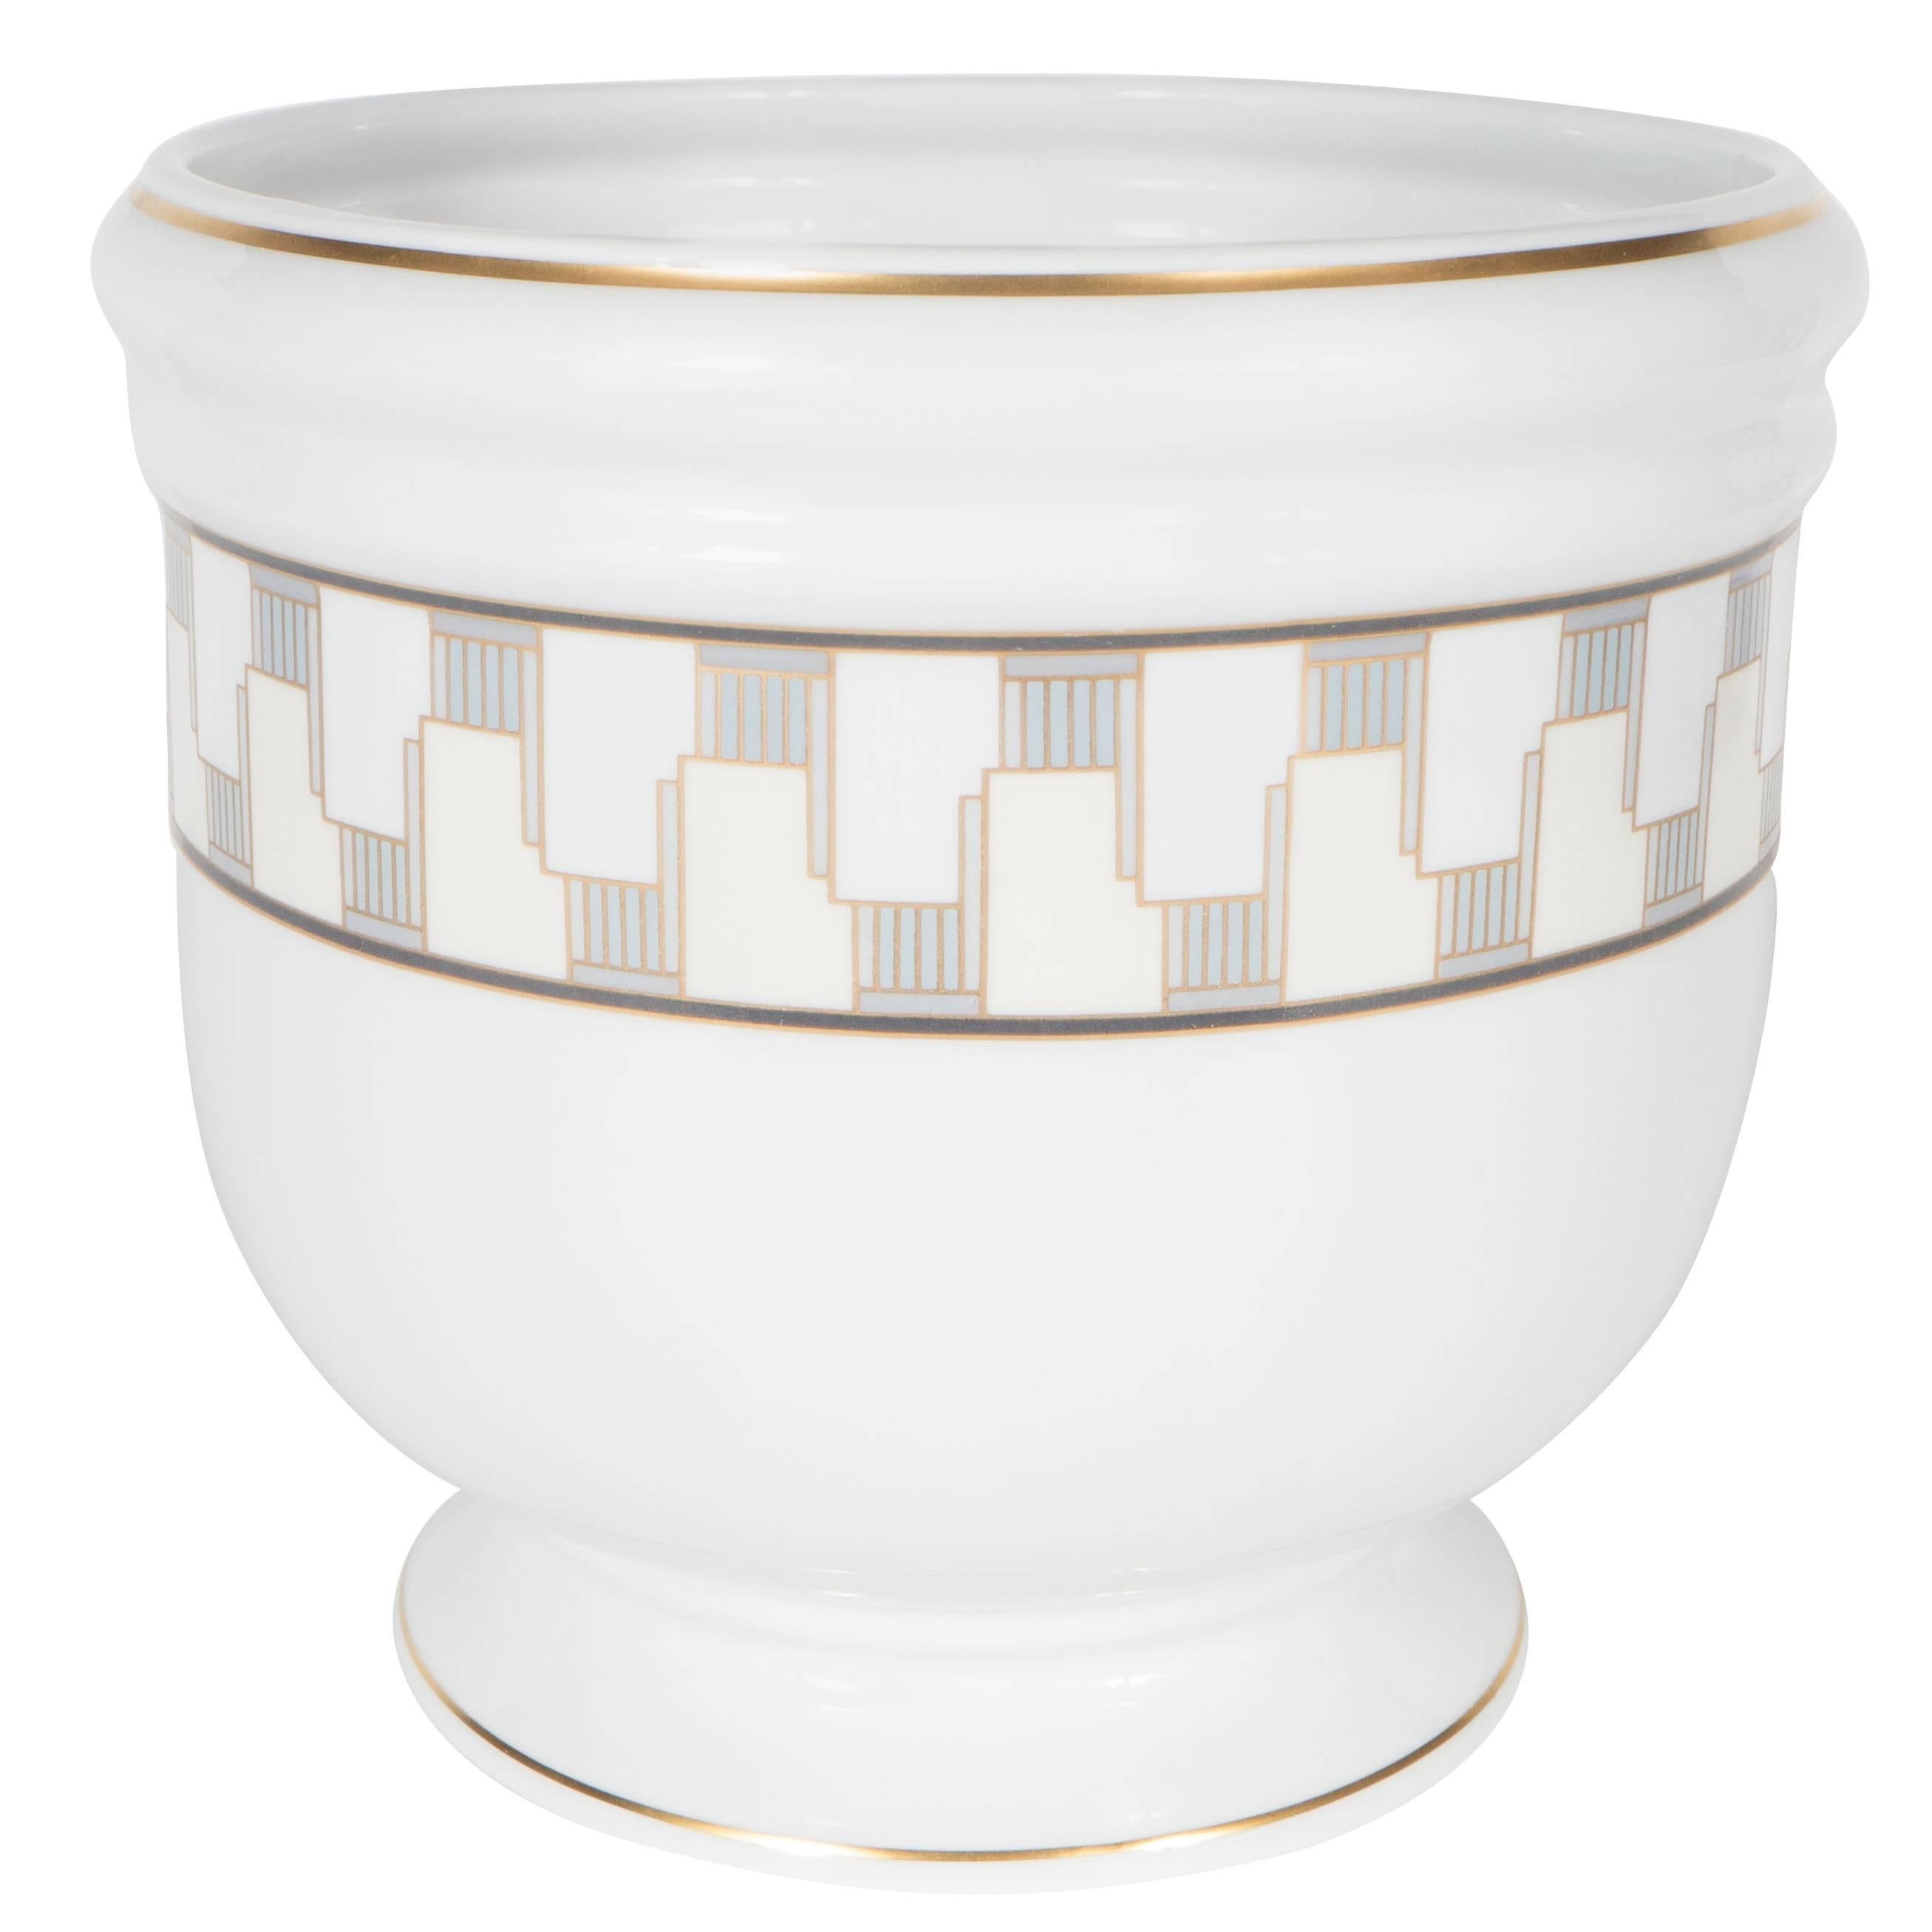 Art Deco Style Limoges Cachepot "Century" by Tiffany & Co